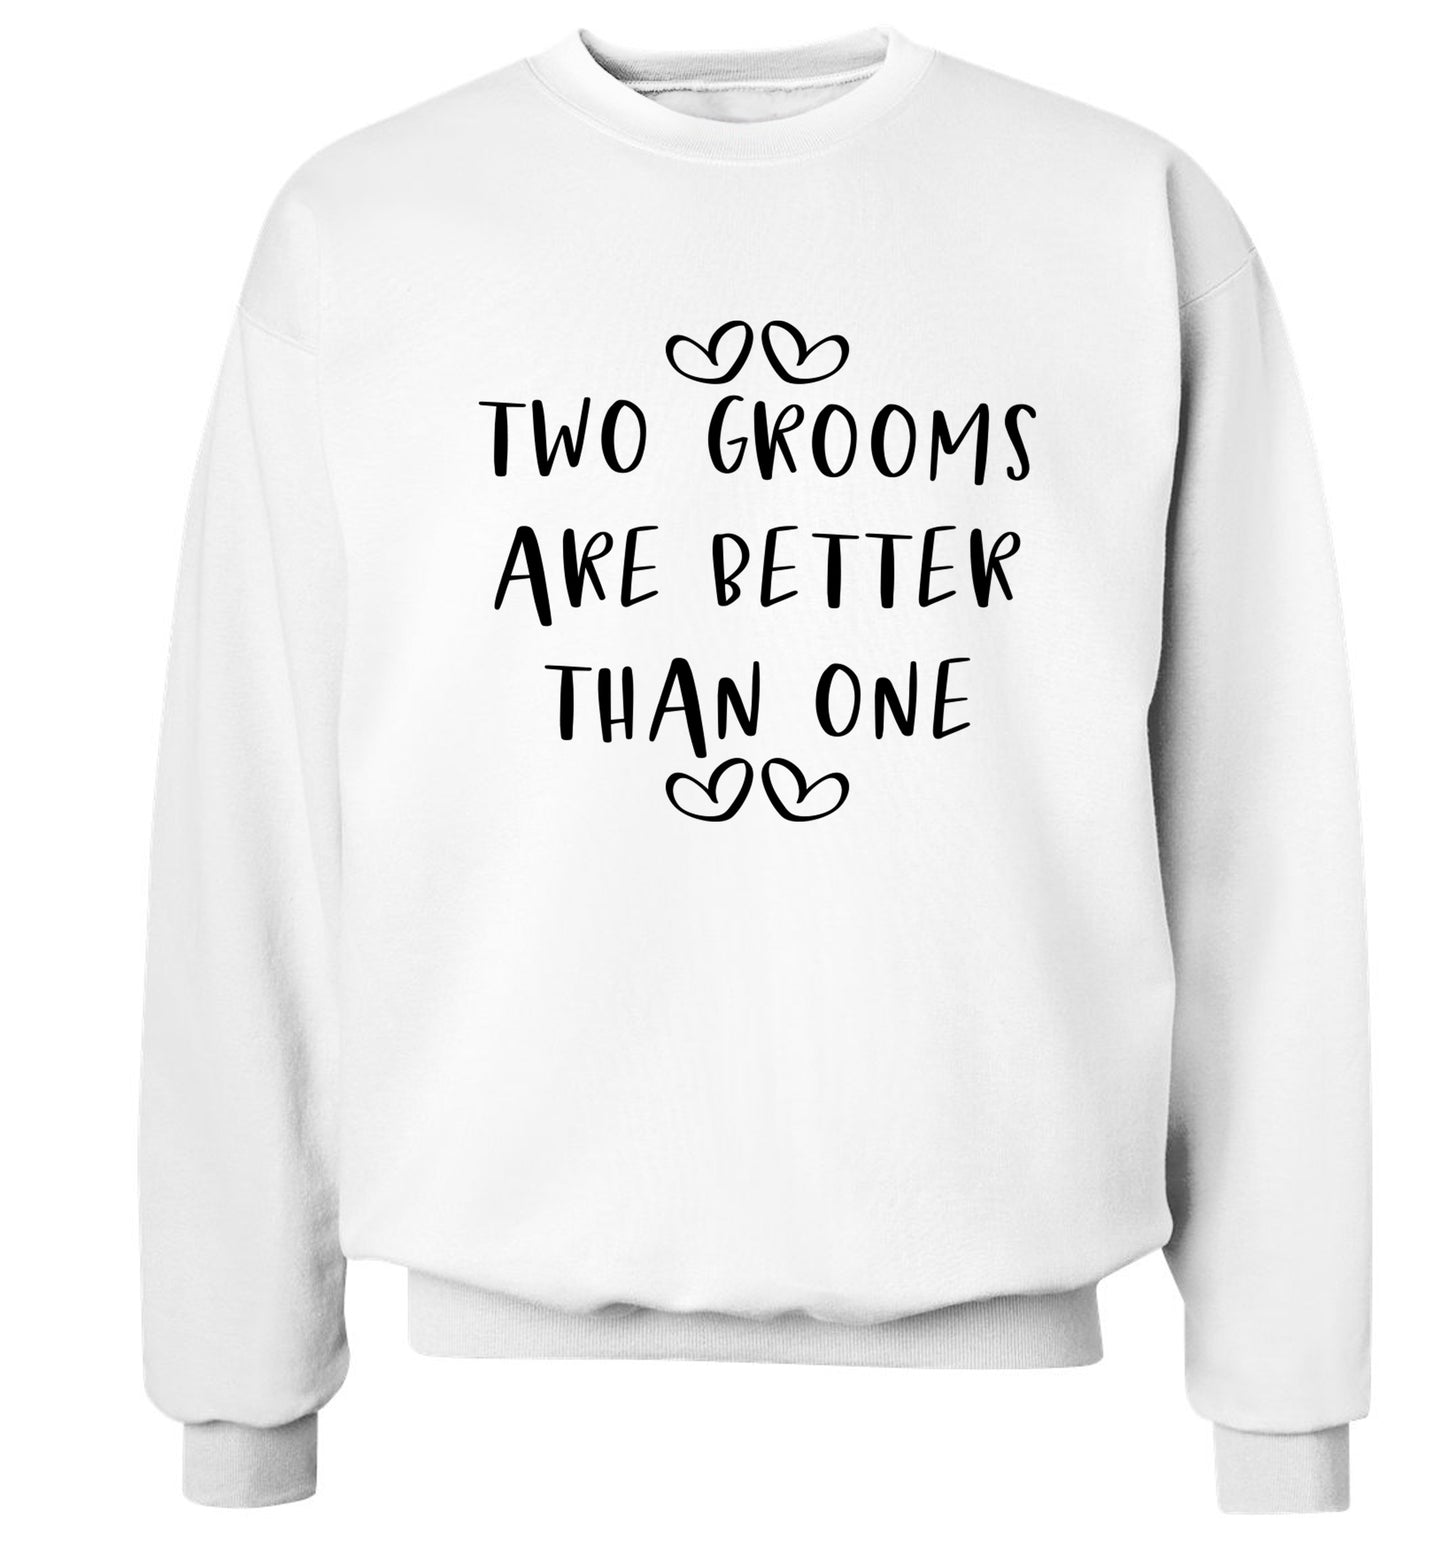 Two grooms are better than one adult's unisex white sweater 2XL